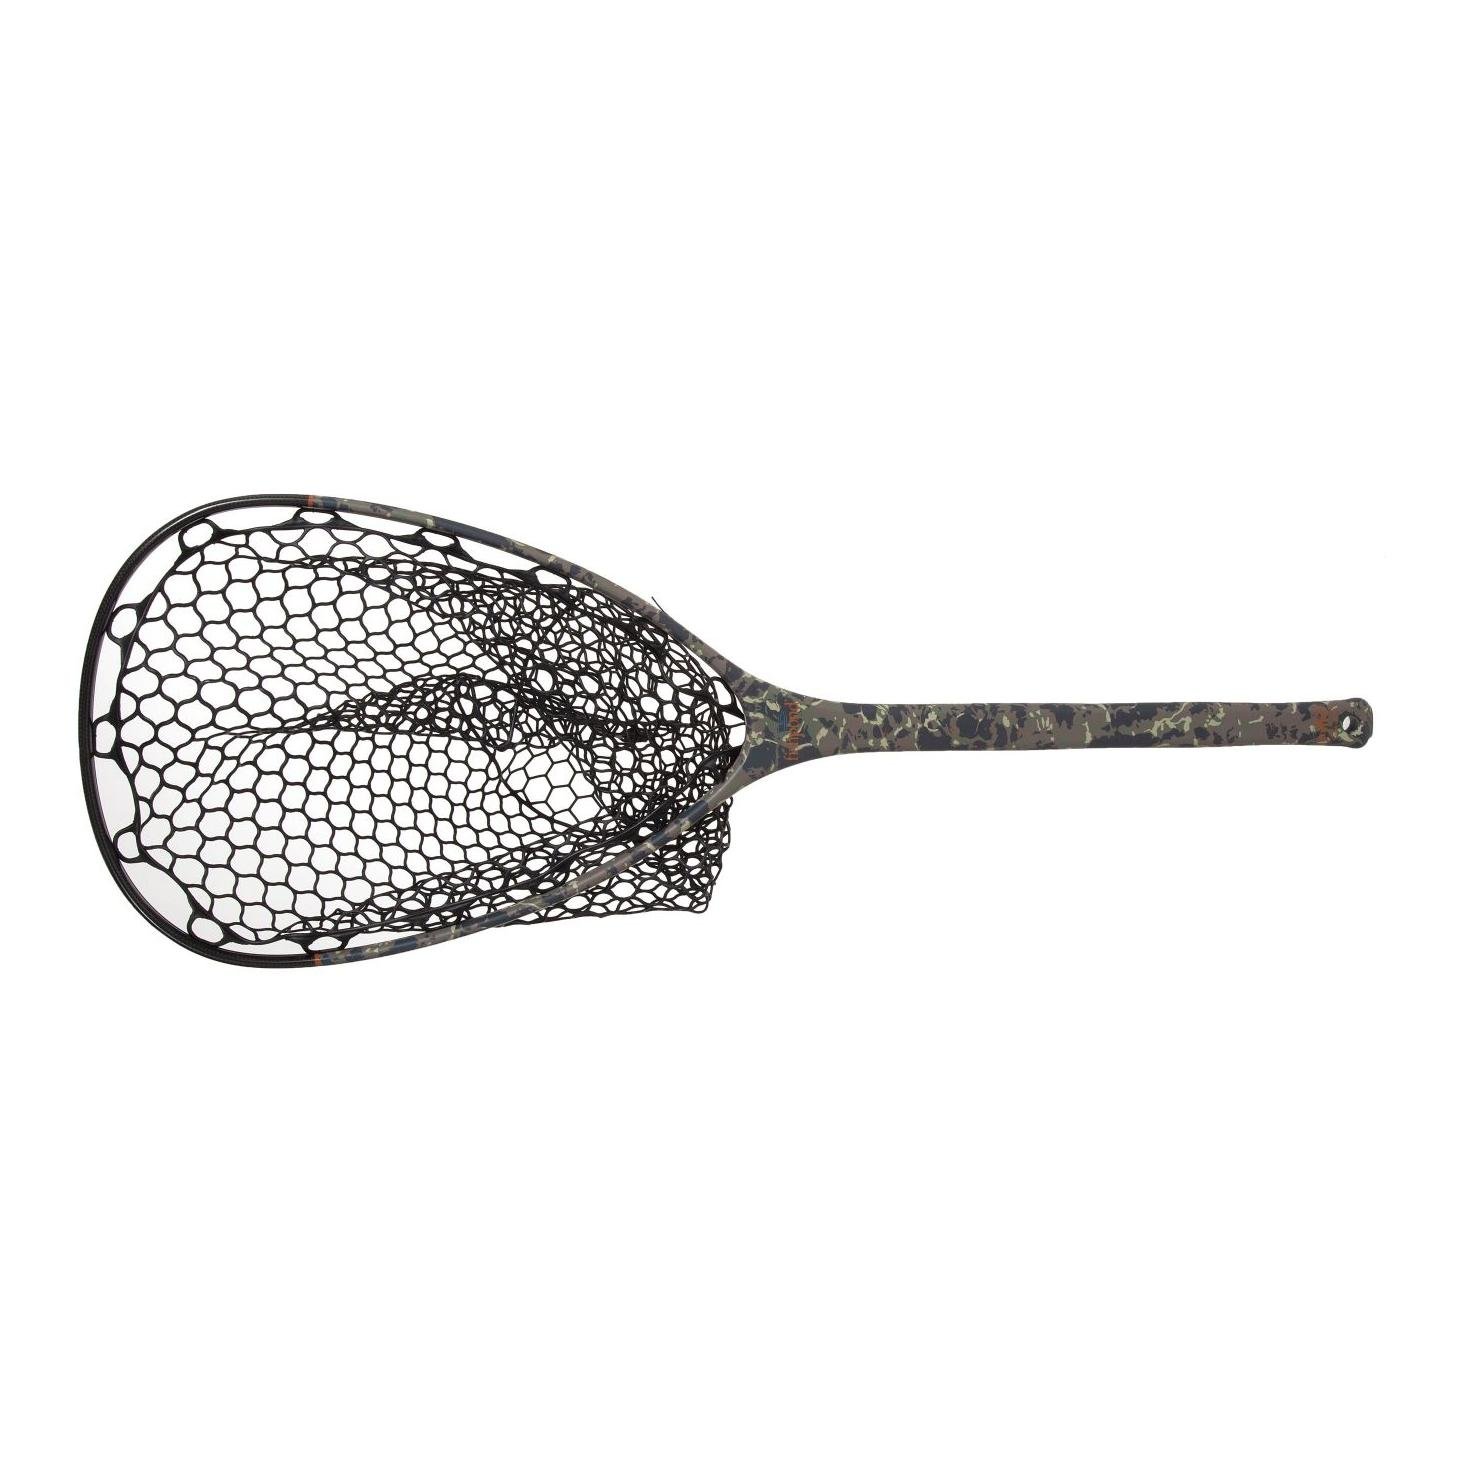 Image of fishpond Nomad Mid-Length Net Riverbed Camo - Watfeumer bei fischen.ch